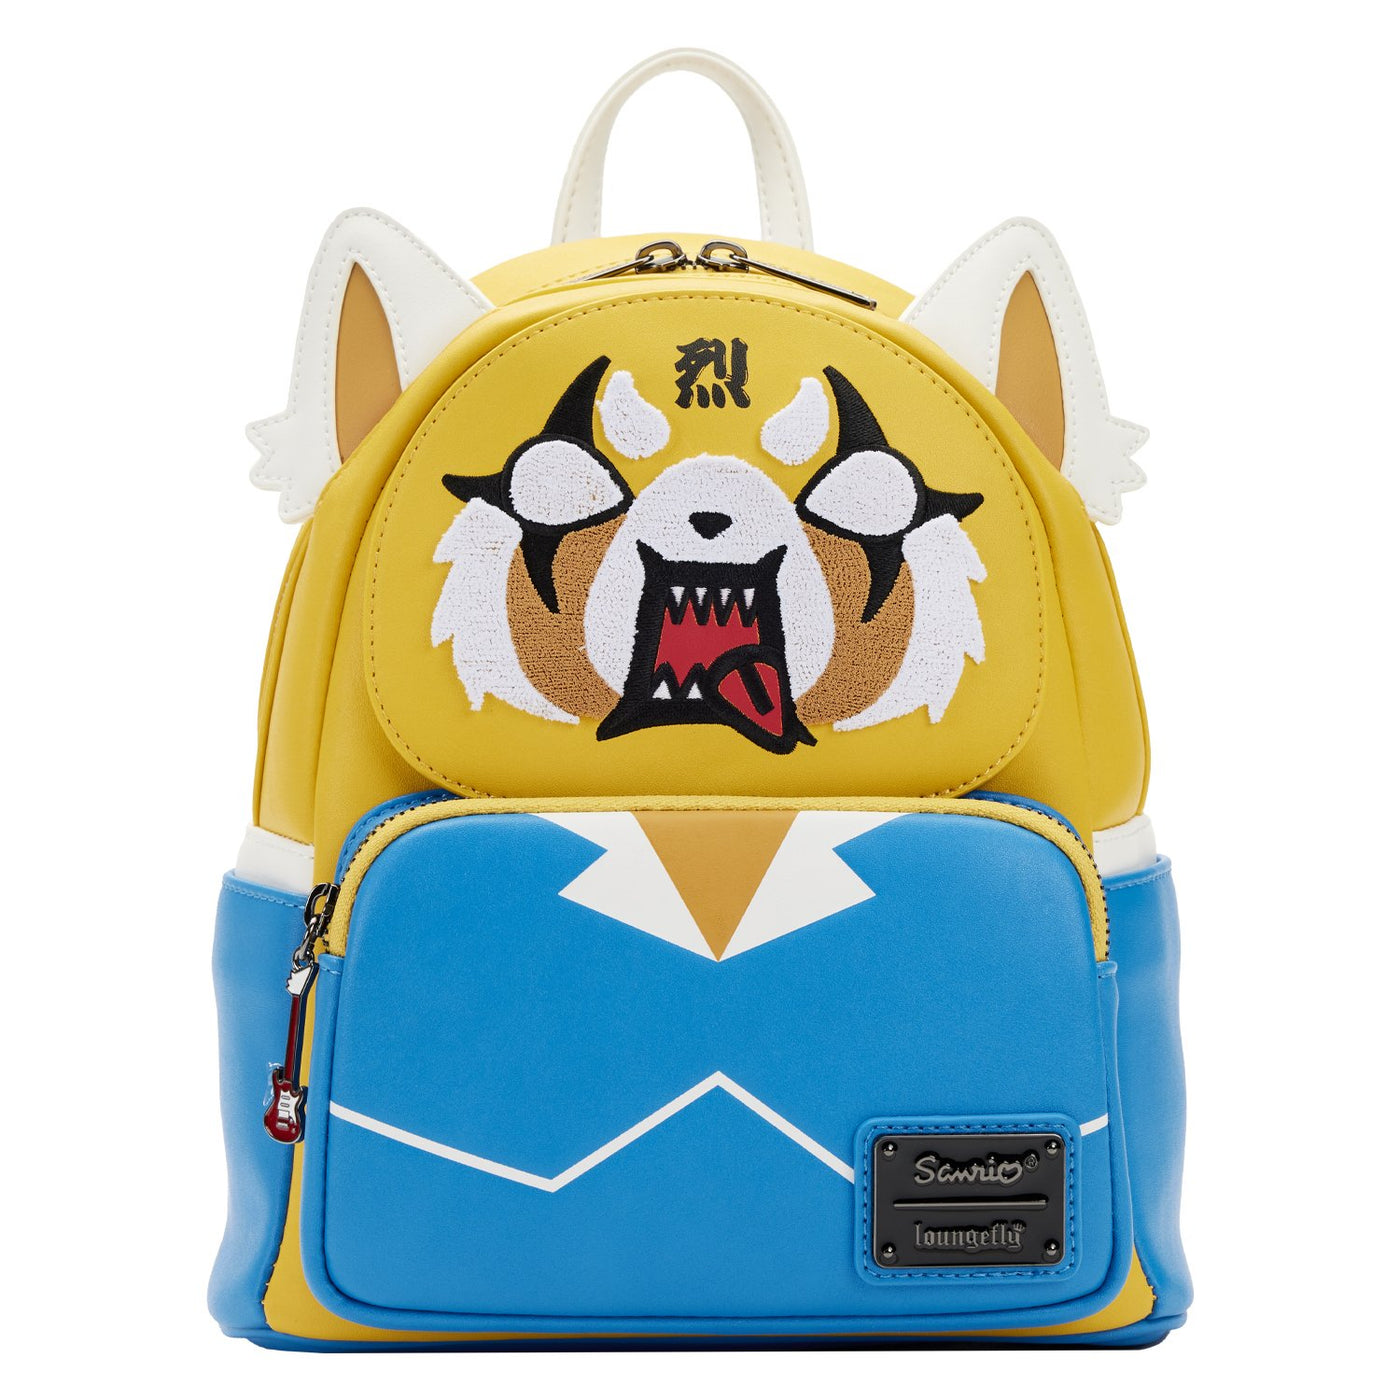 Loungefly Sanrio Aggretsuko Two Face Cosplay Mini Backpack - Applique Face Change